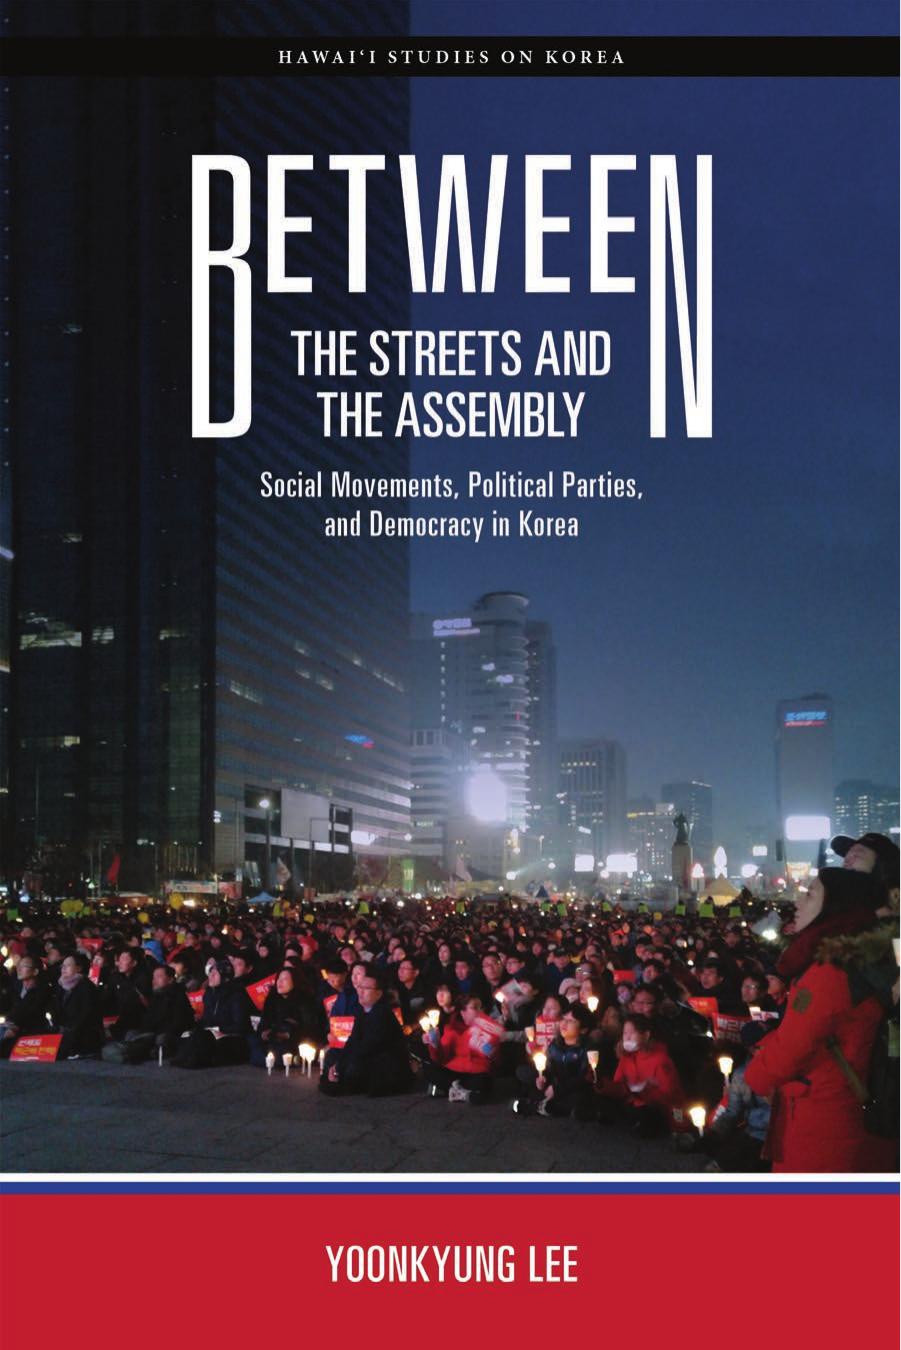 Between the Streets and the Assembly: Social Movements, Political Parties, and Democracy in Korea by Yoonkyung Lee